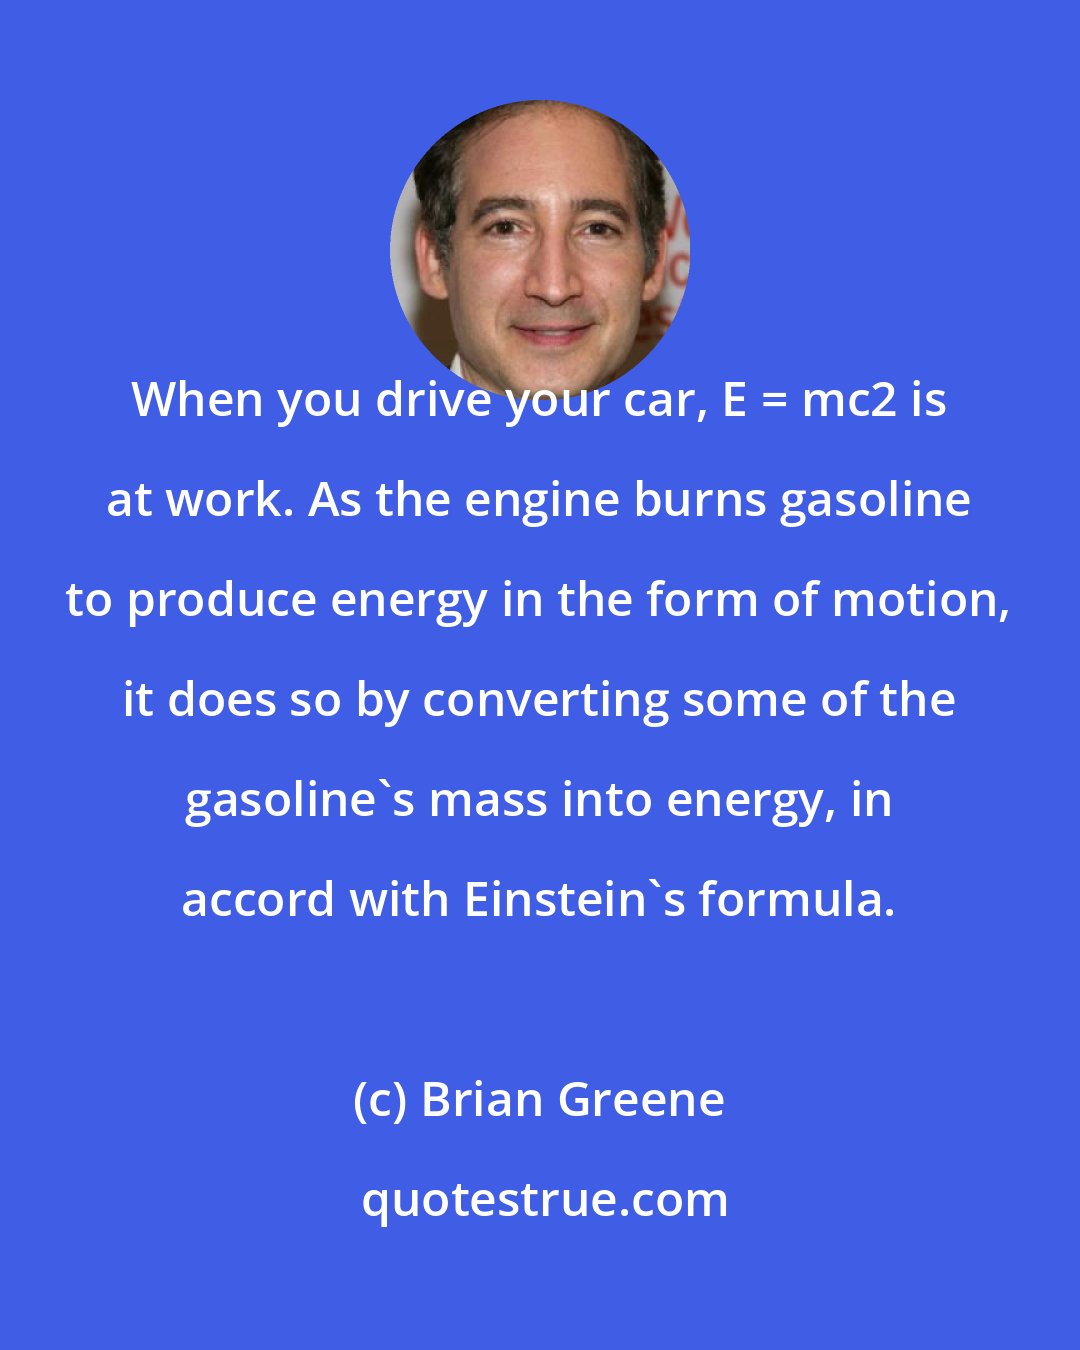 Brian Greene: When you drive your car, E = mc2 is at work. As the engine burns gasoline to produce energy in the form of motion, it does so by converting some of the gasoline's mass into energy, in accord with Einstein's formula.